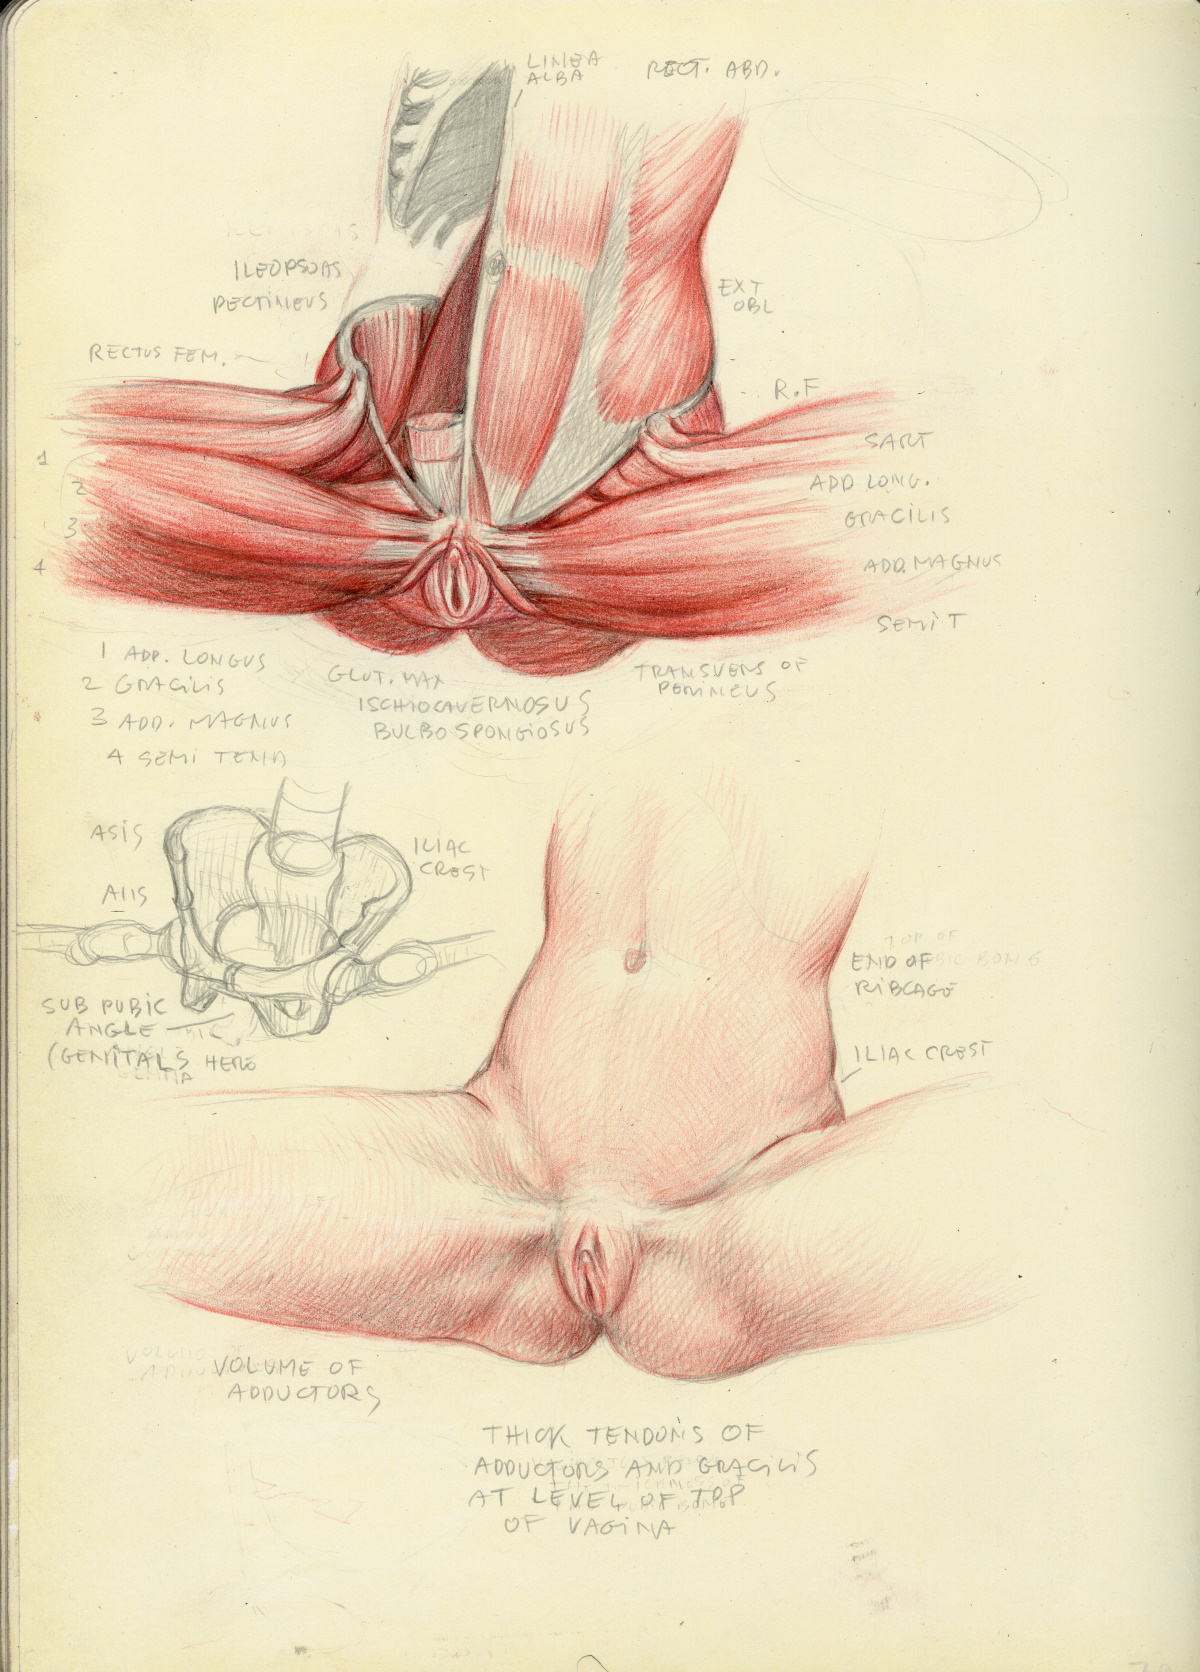 female pelvis, drawing and anatomical study